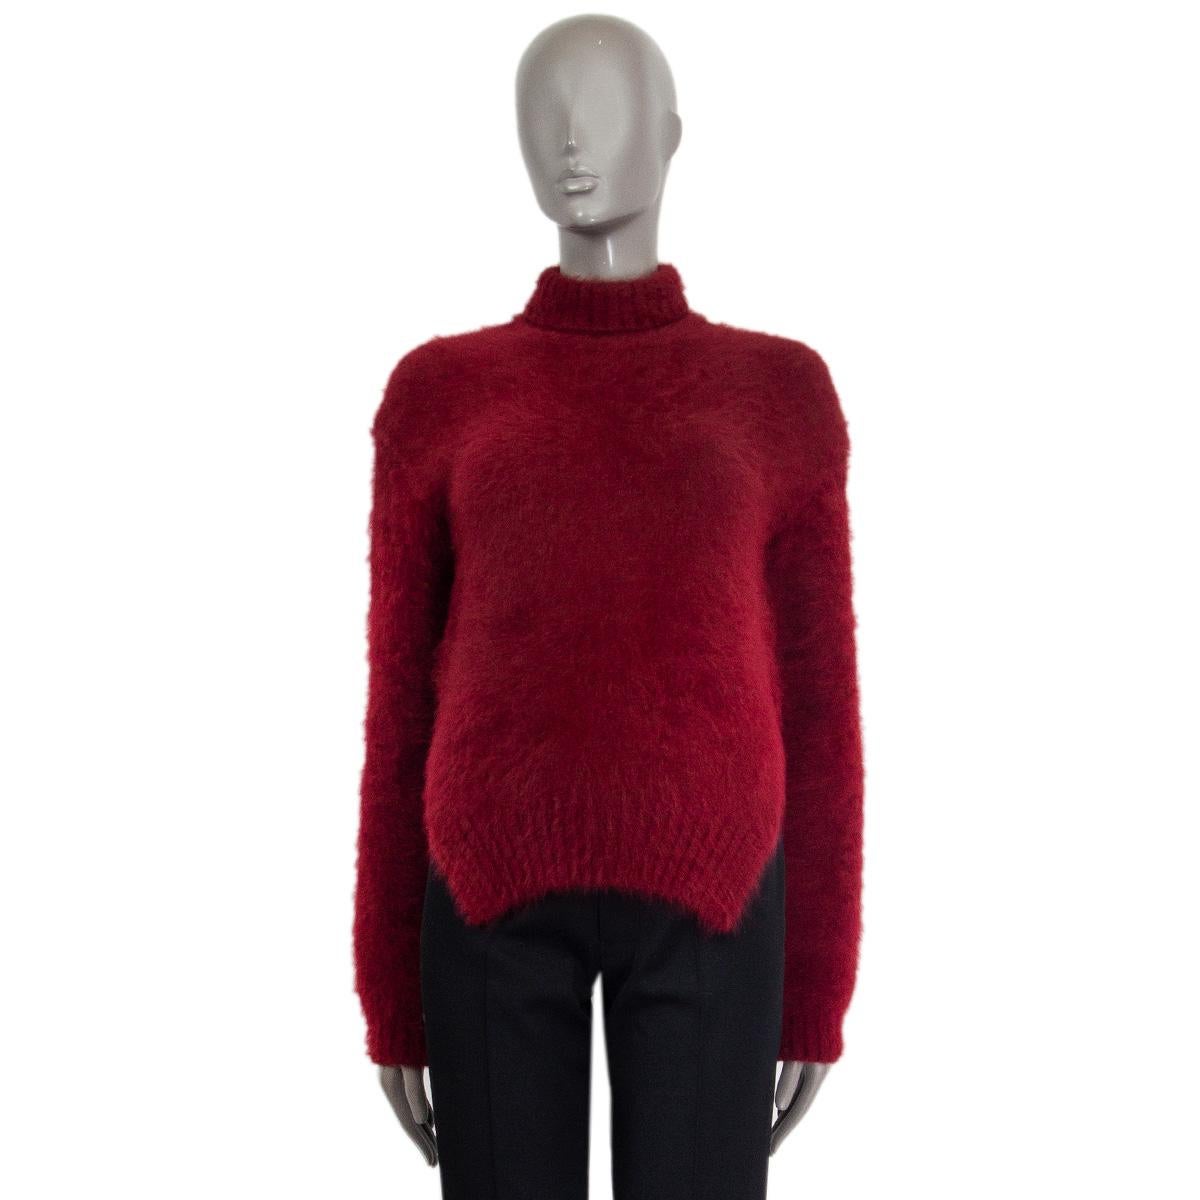 100% authentic Celine turtleneck sweater in burgundy angora (77%) polyamide (23%) with two side-slits. Comes with a ribbed turtleneck, hem, and ribbed cuffs. Slip-on sweater. Has been worn and is in excellent condition.

Measurements
Tag